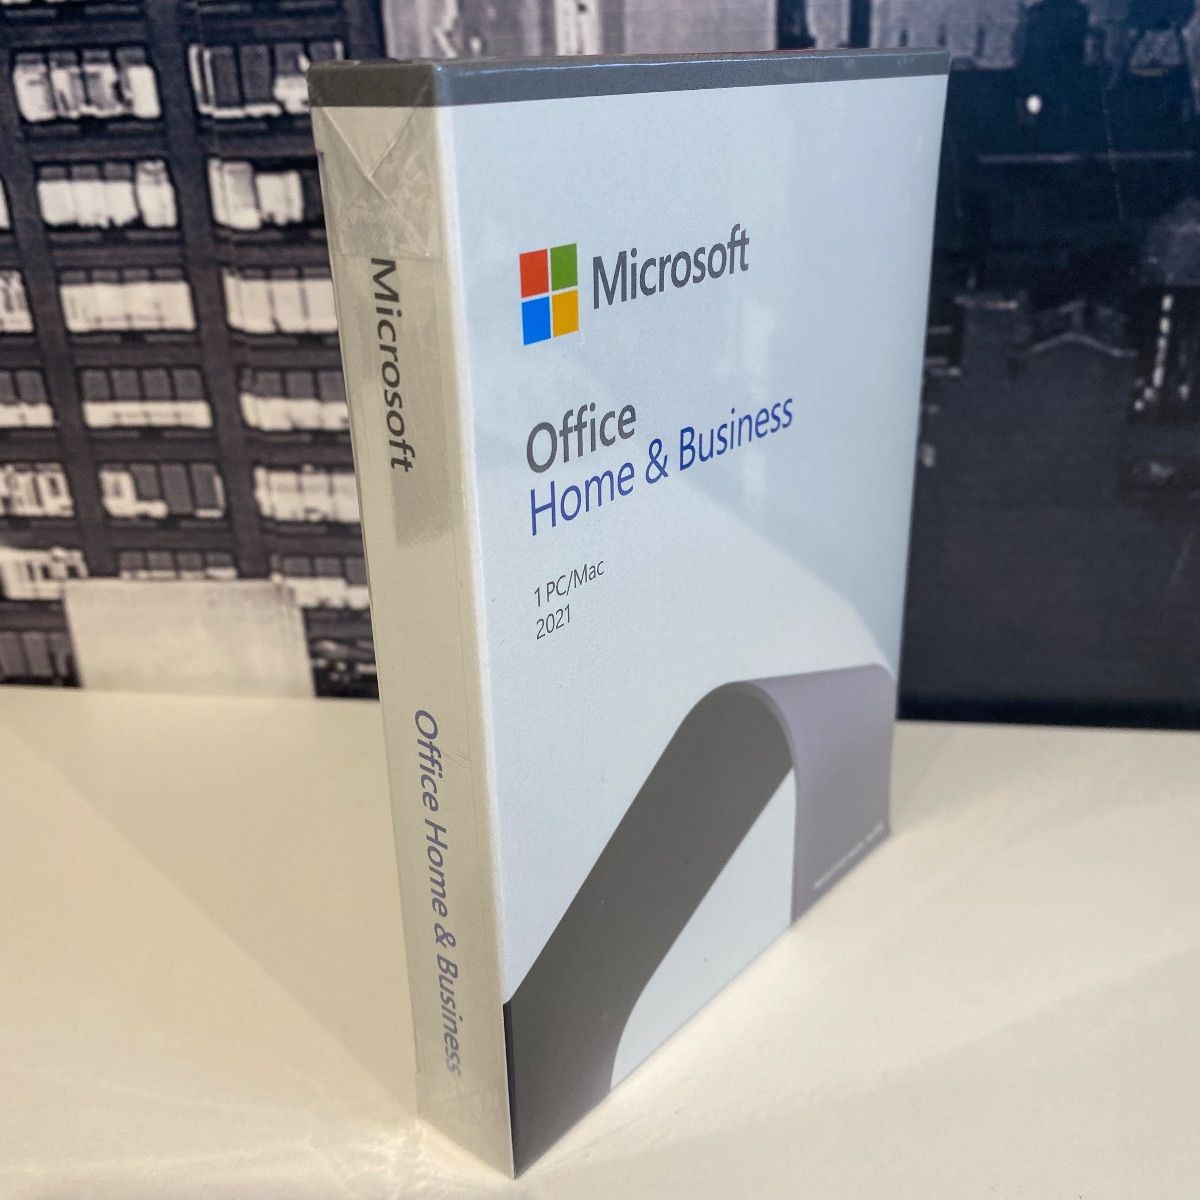 Microsoft Office 2021 Home and Business Word Excel Outlook 365 2019 100% Genuine T5D-03511 889842853001 (Brand New & Sealed)